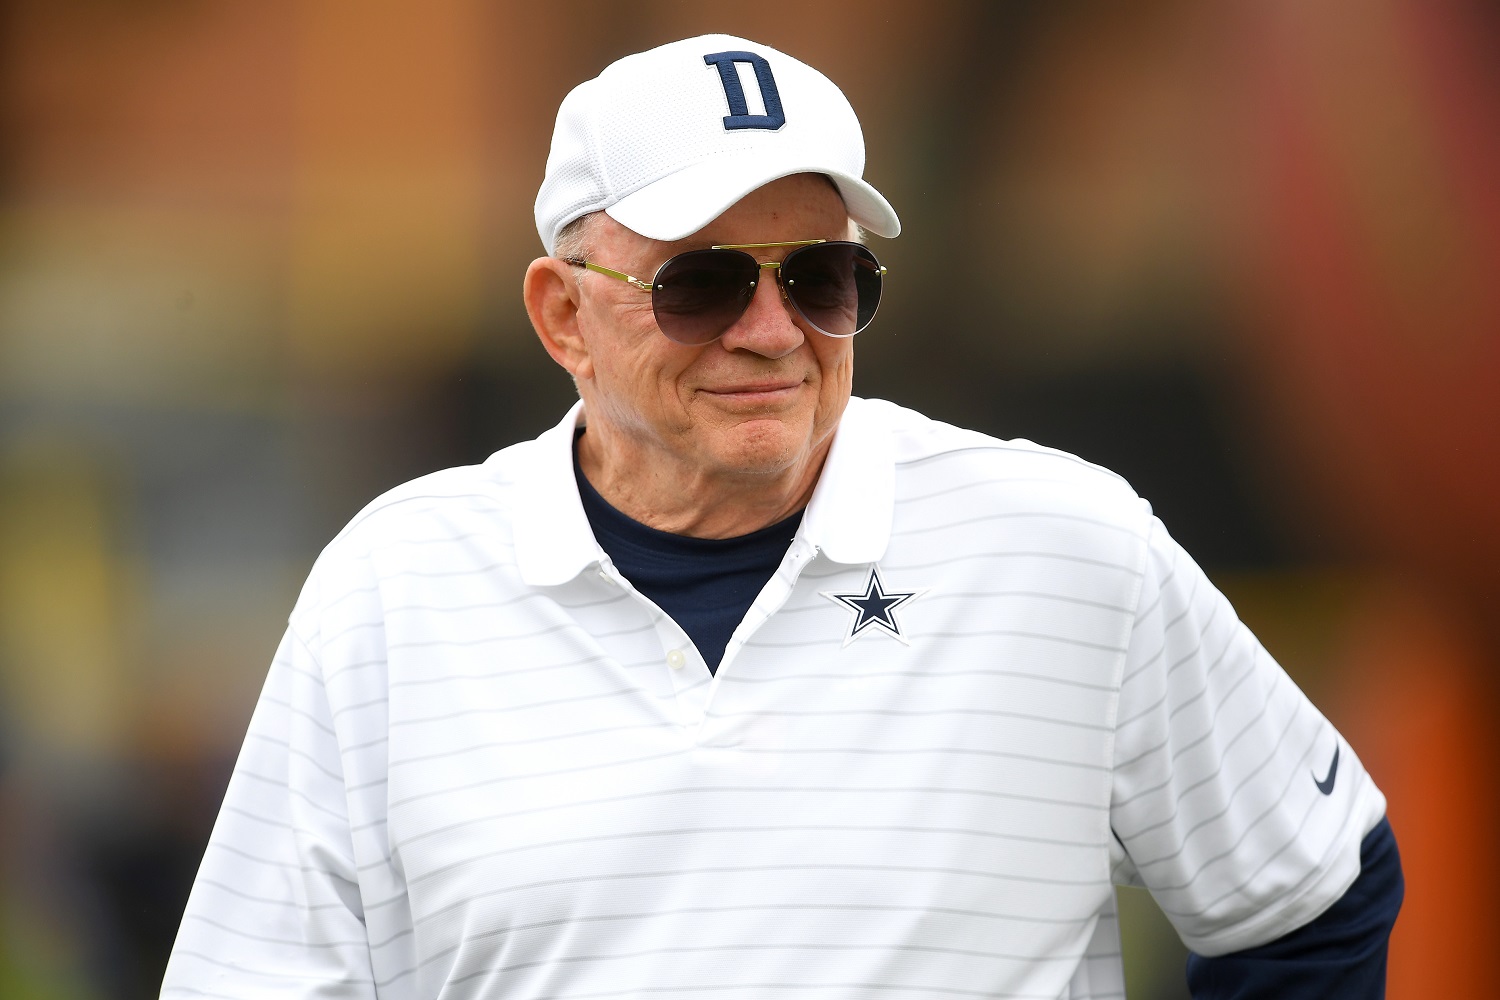 Cowboys Owner Jerry Jones Is ‘Scared to Death’ for a Legitimate Reason